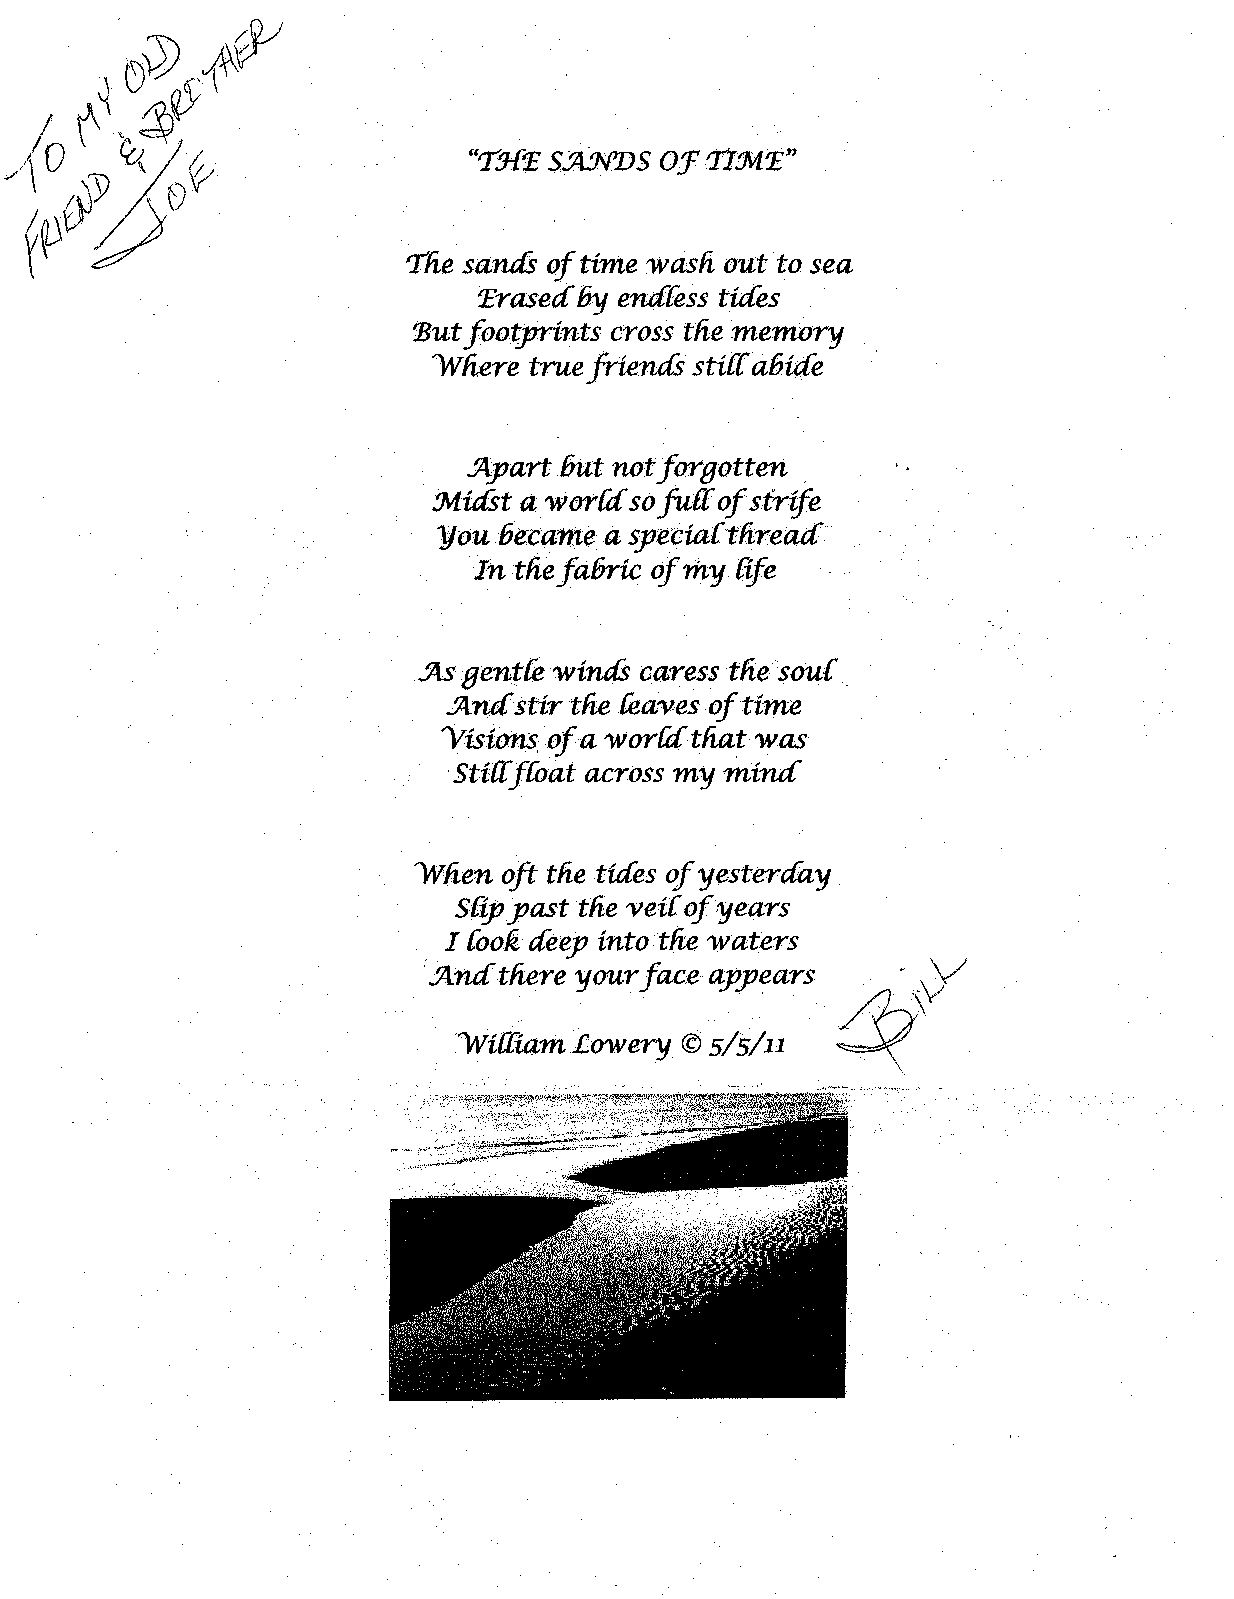 The Sands Of Time poem